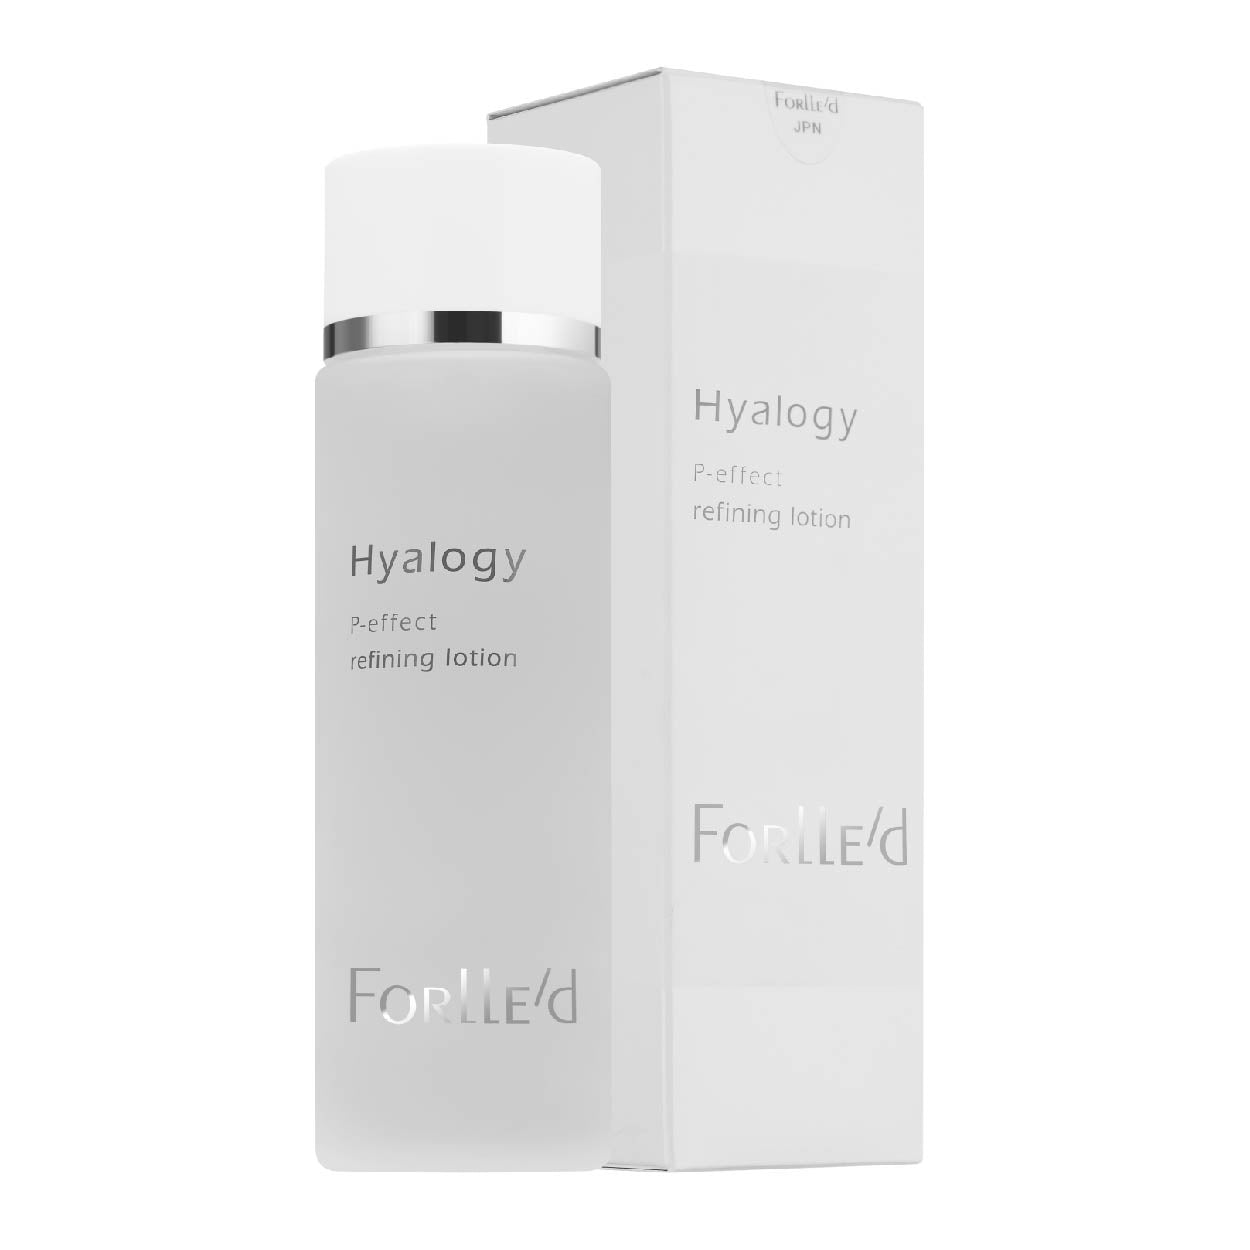 Forlle'd - Hyalogy P-effect Refining Lotion